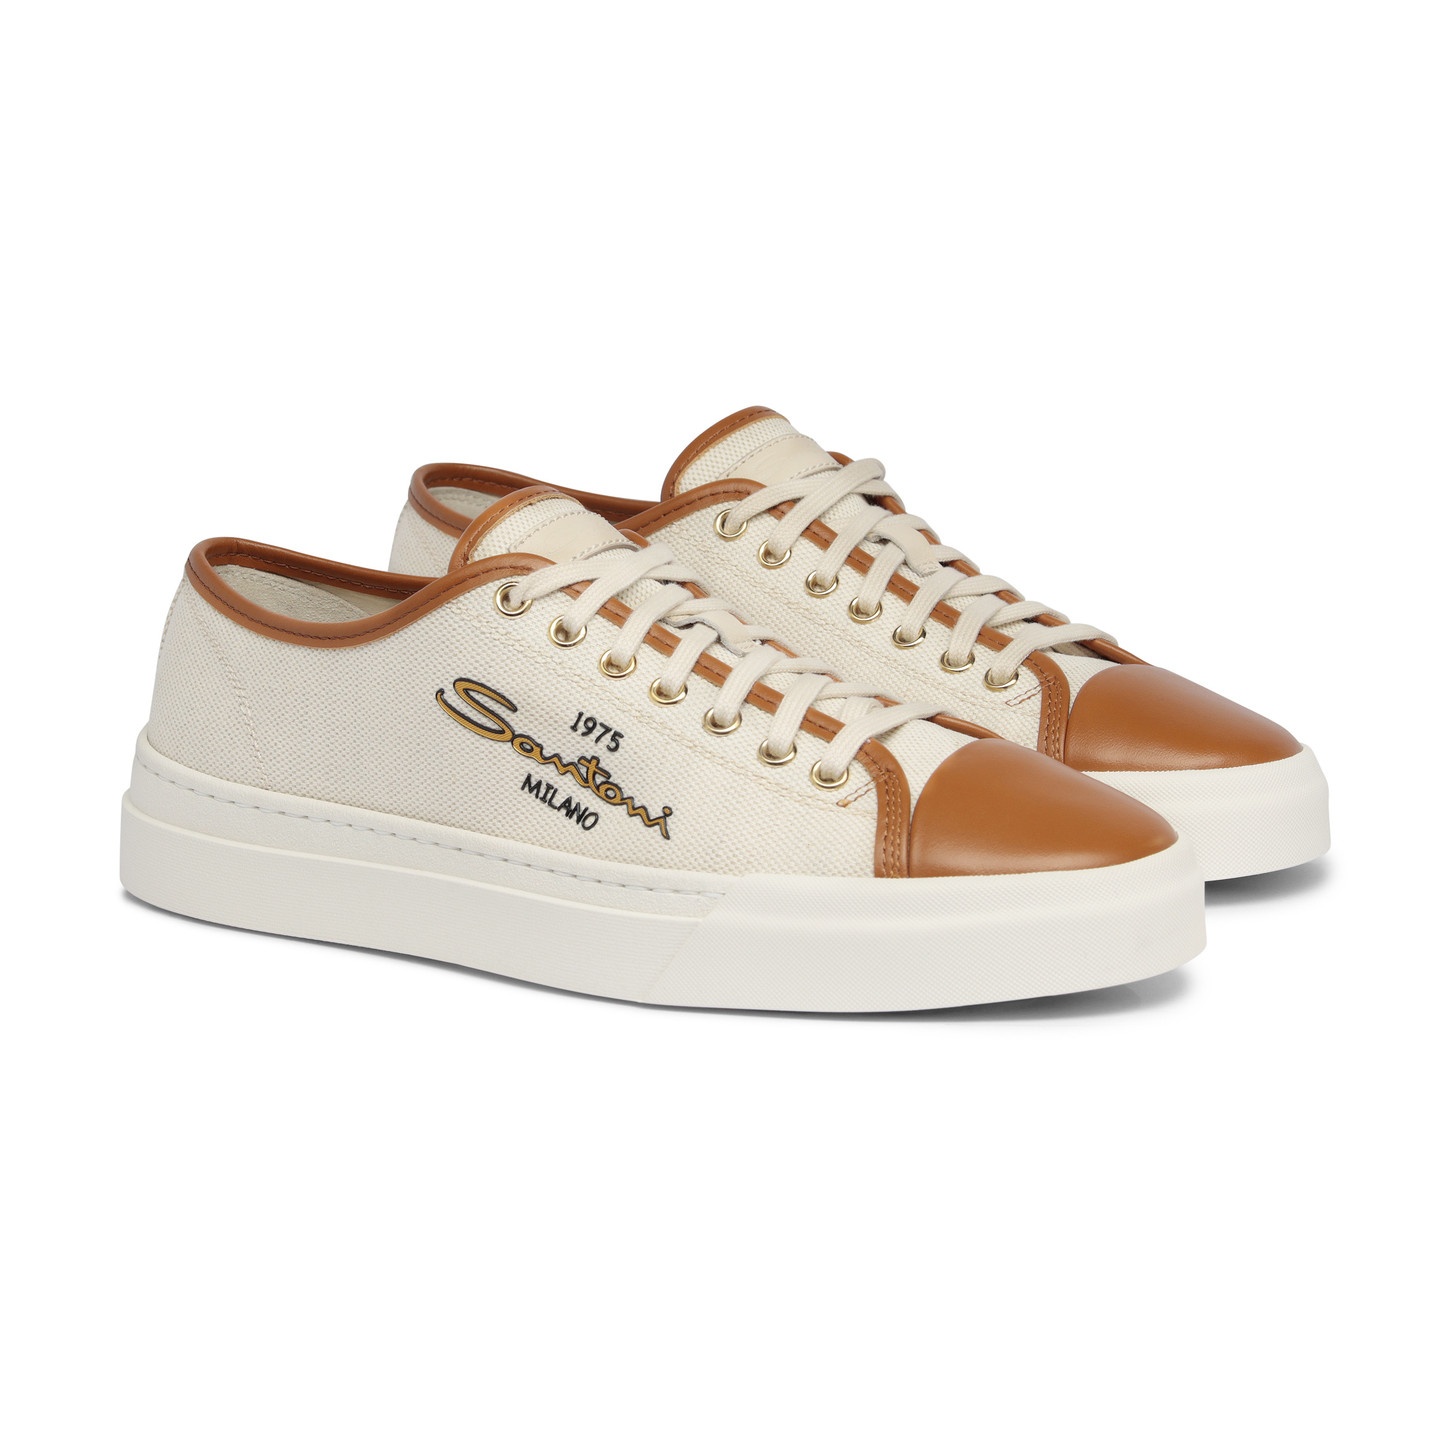 Men's brown leather and canvas sneaker - 3